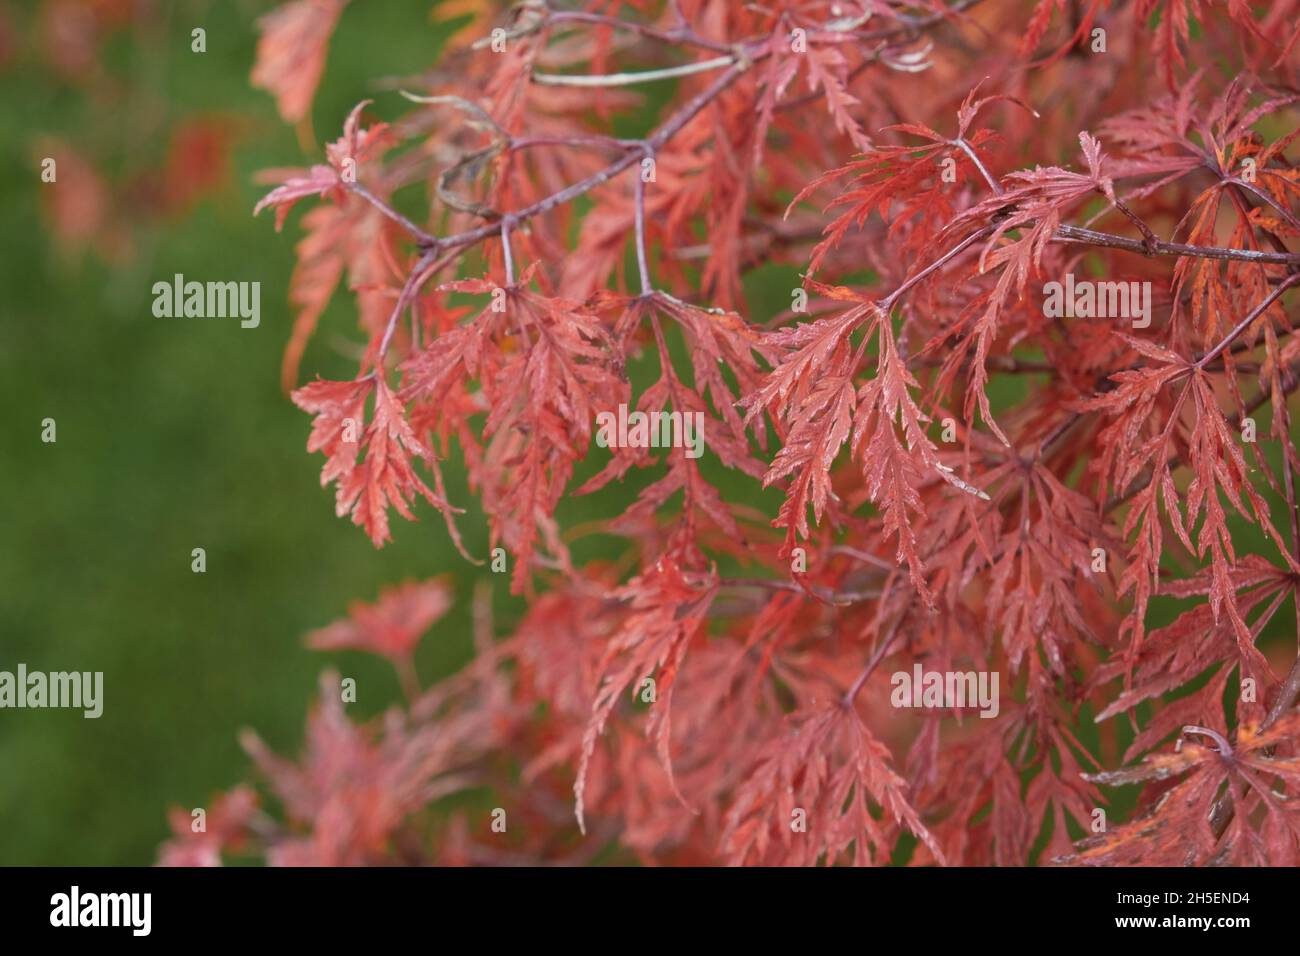 Japanese maple red leaves in autumn with green background. Acer palmatum dissectum Stock Photo